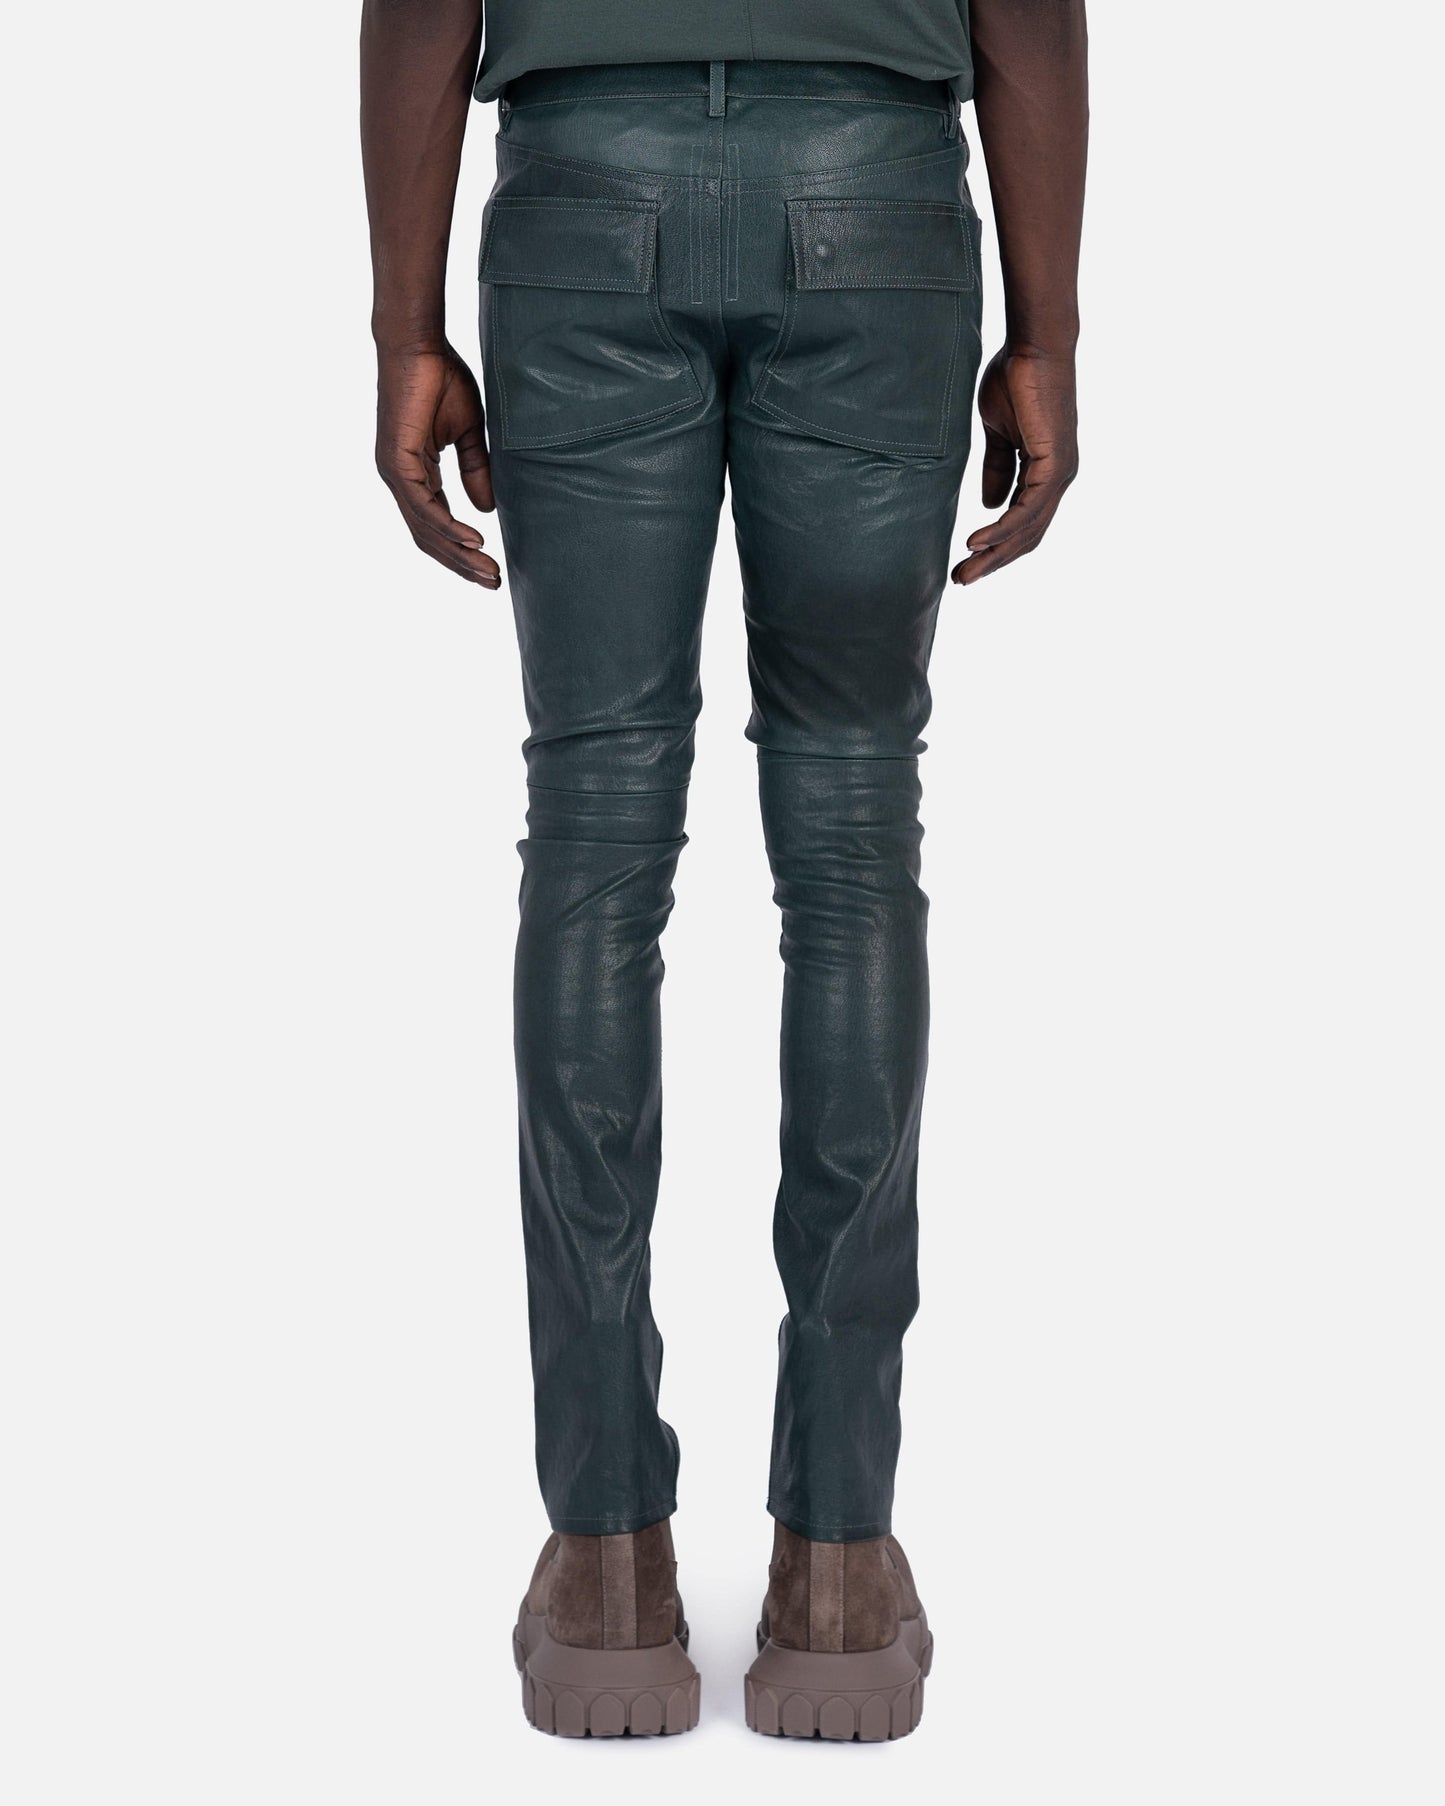 Rick Owens Men's Jeans Leather Tyrone Jeans in Teal